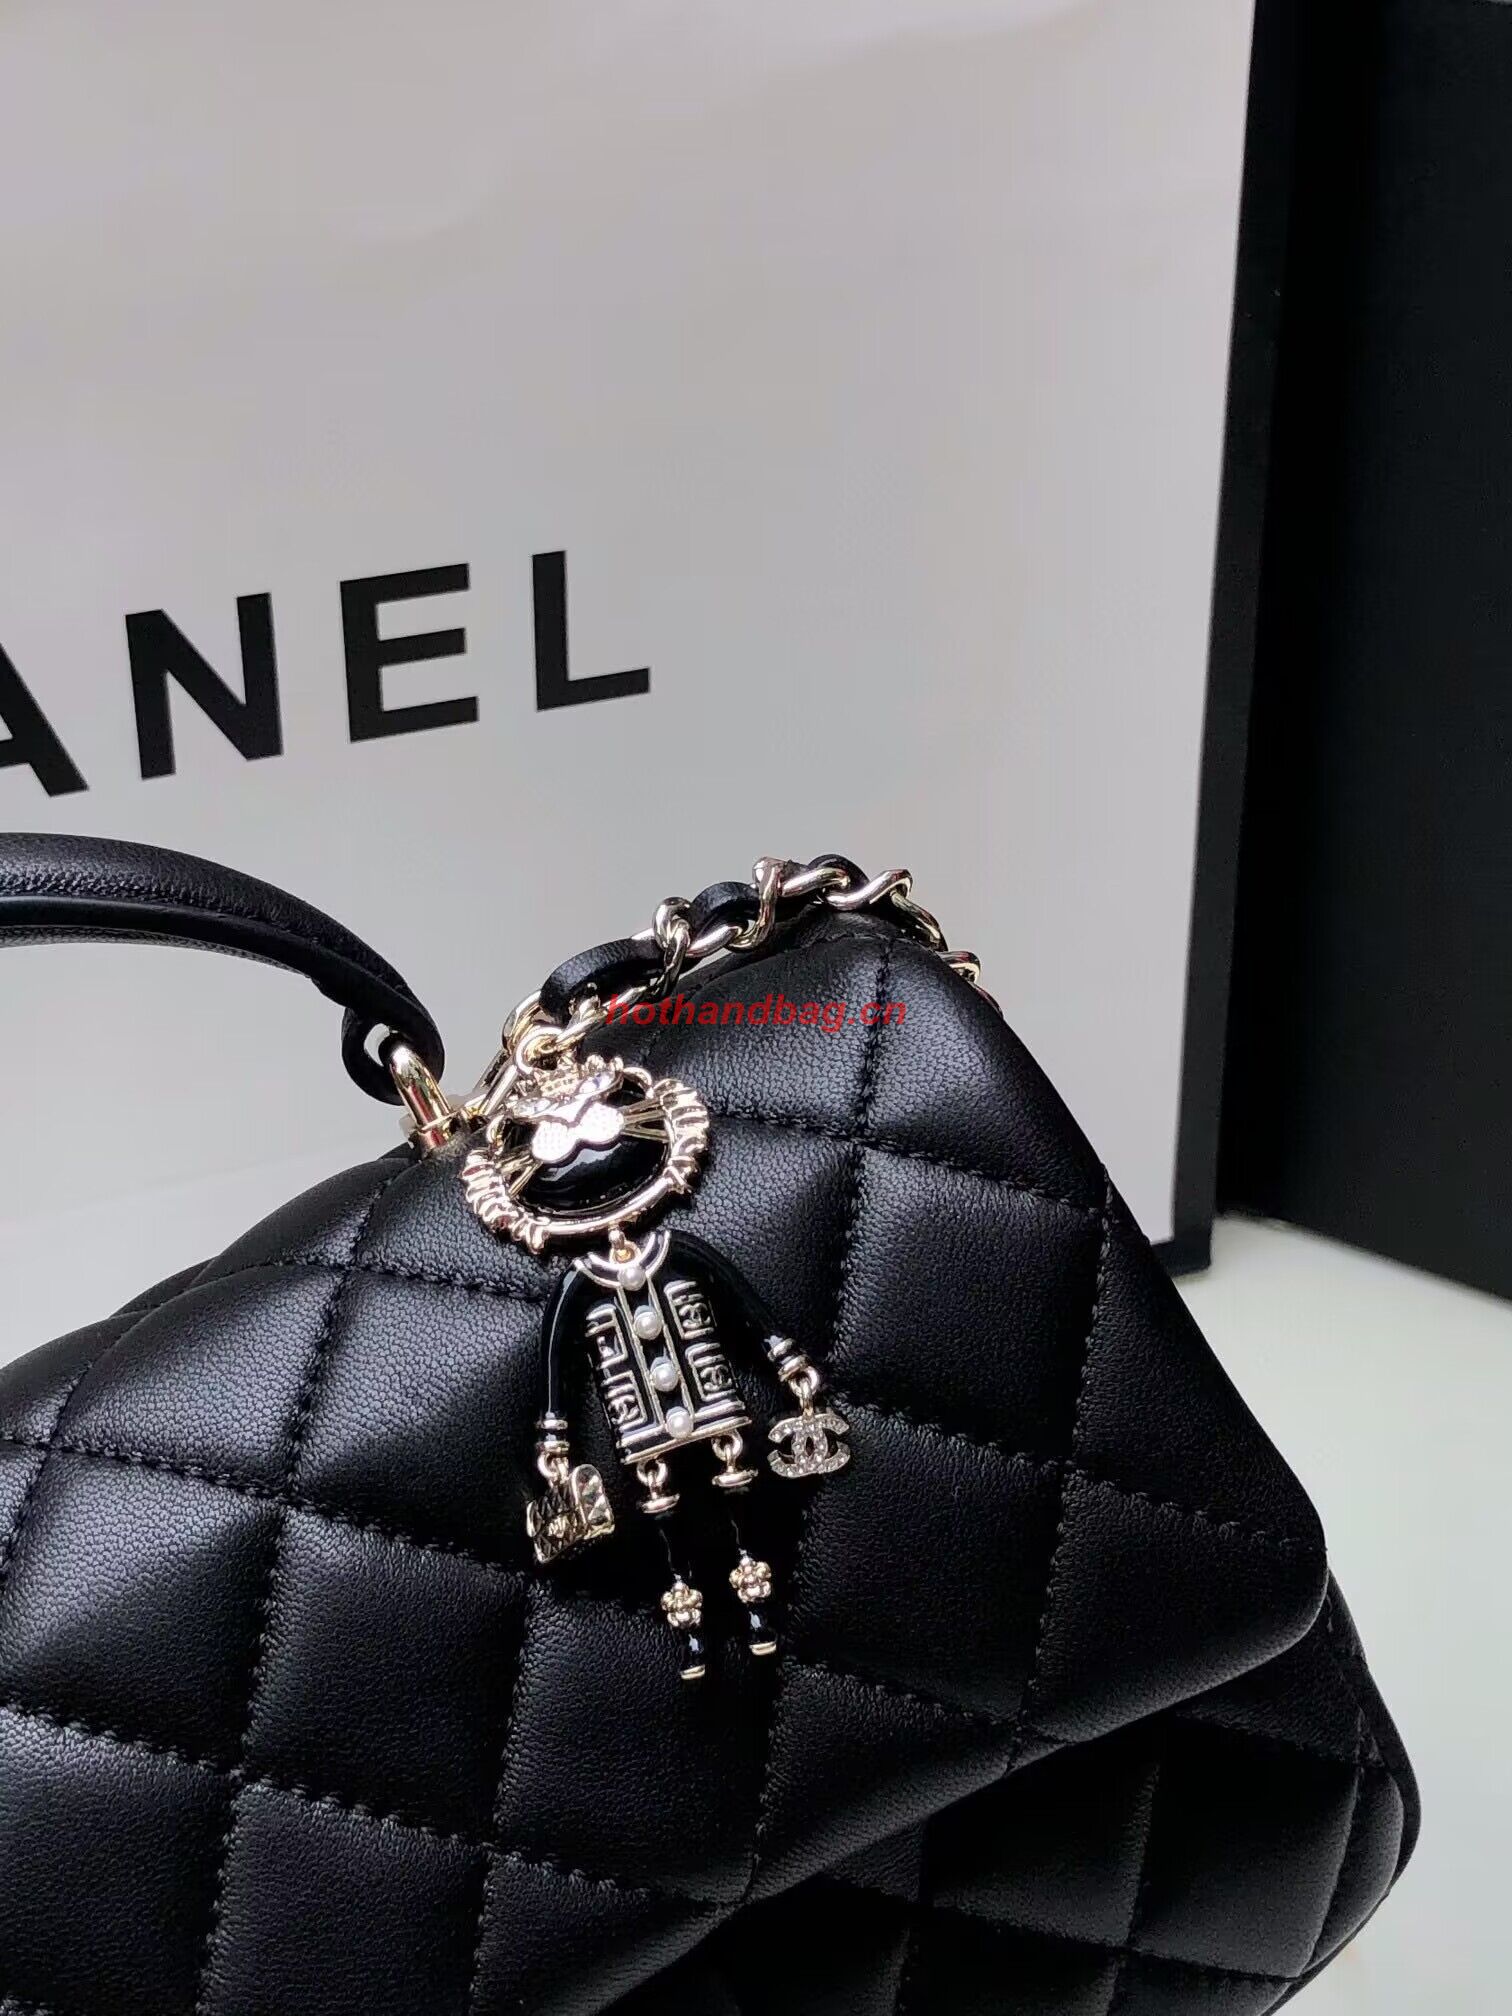 CHANEL mini flap bag with top handle AS2431 Black&Gold-Tone